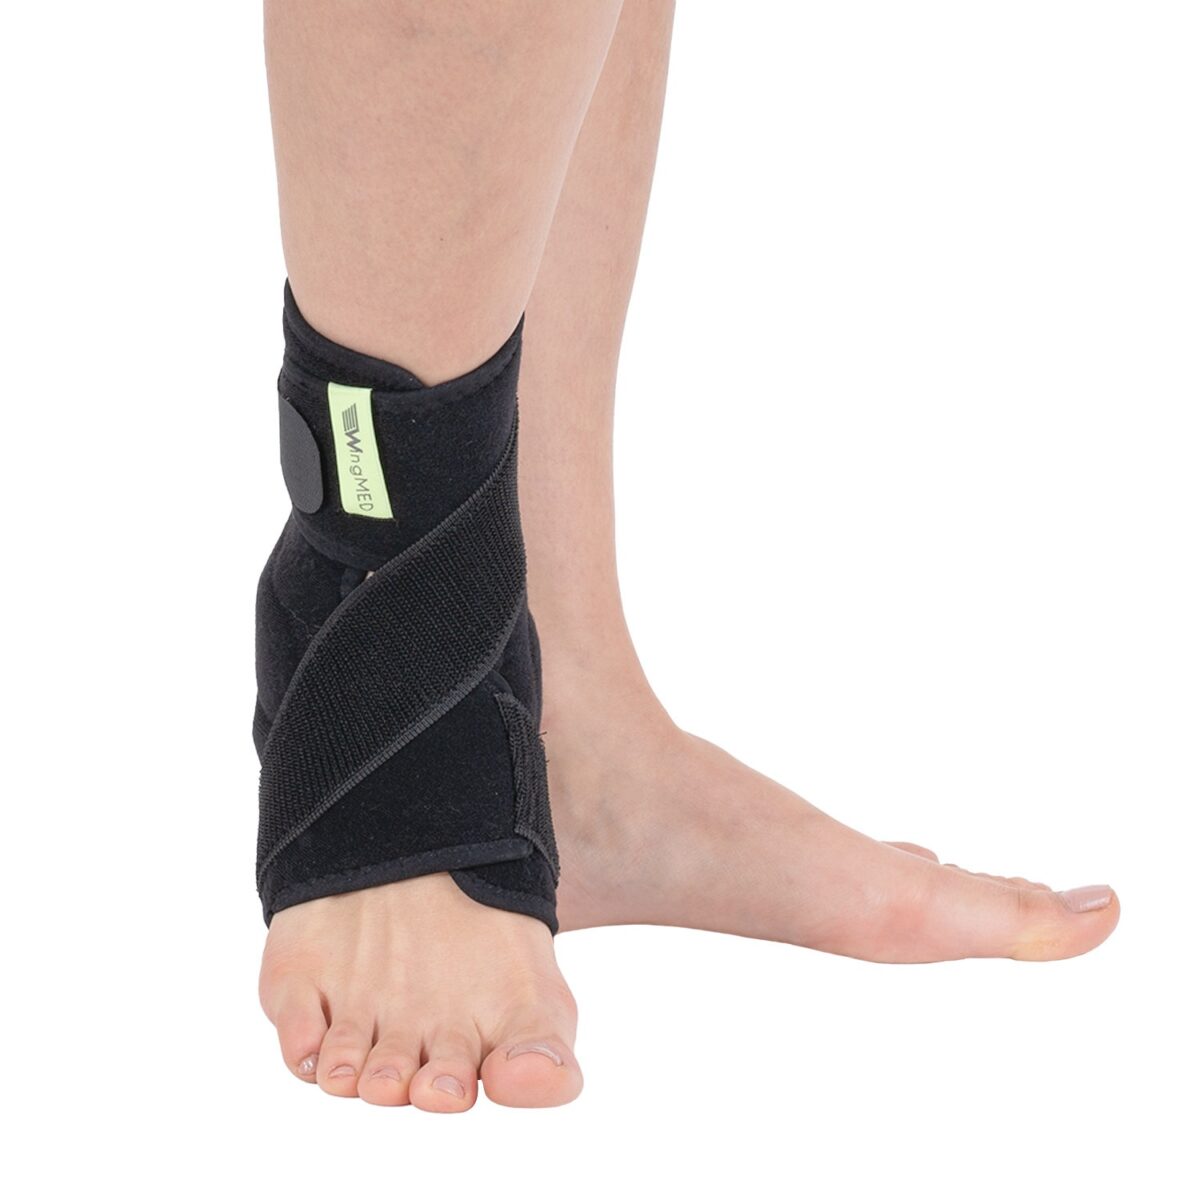 wingmed orthopedic equipments W607 achilles tendon ankle support with 8 strap 51 1 1